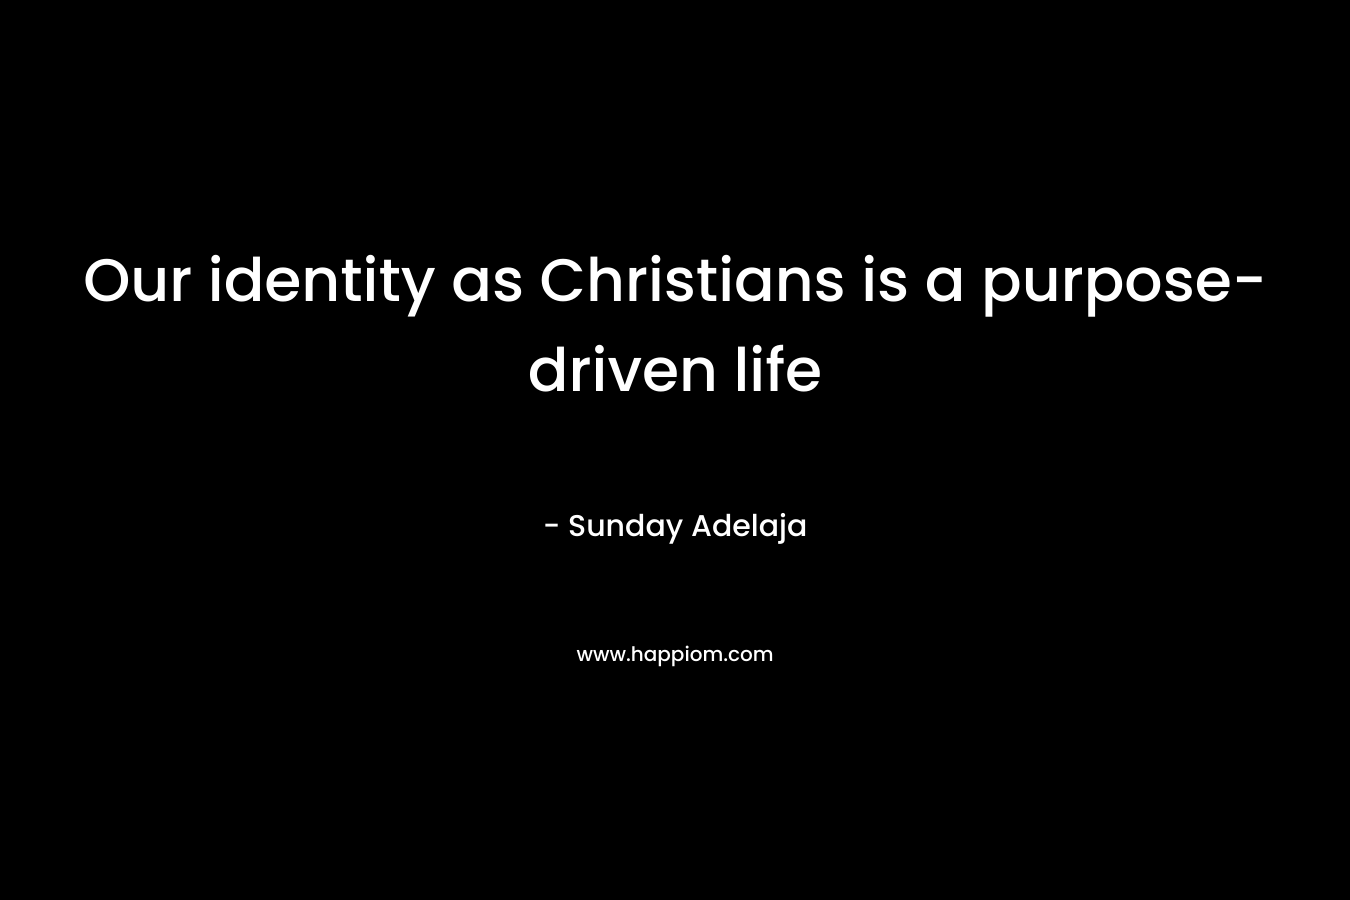 Our identity as Christians is a purpose-driven life